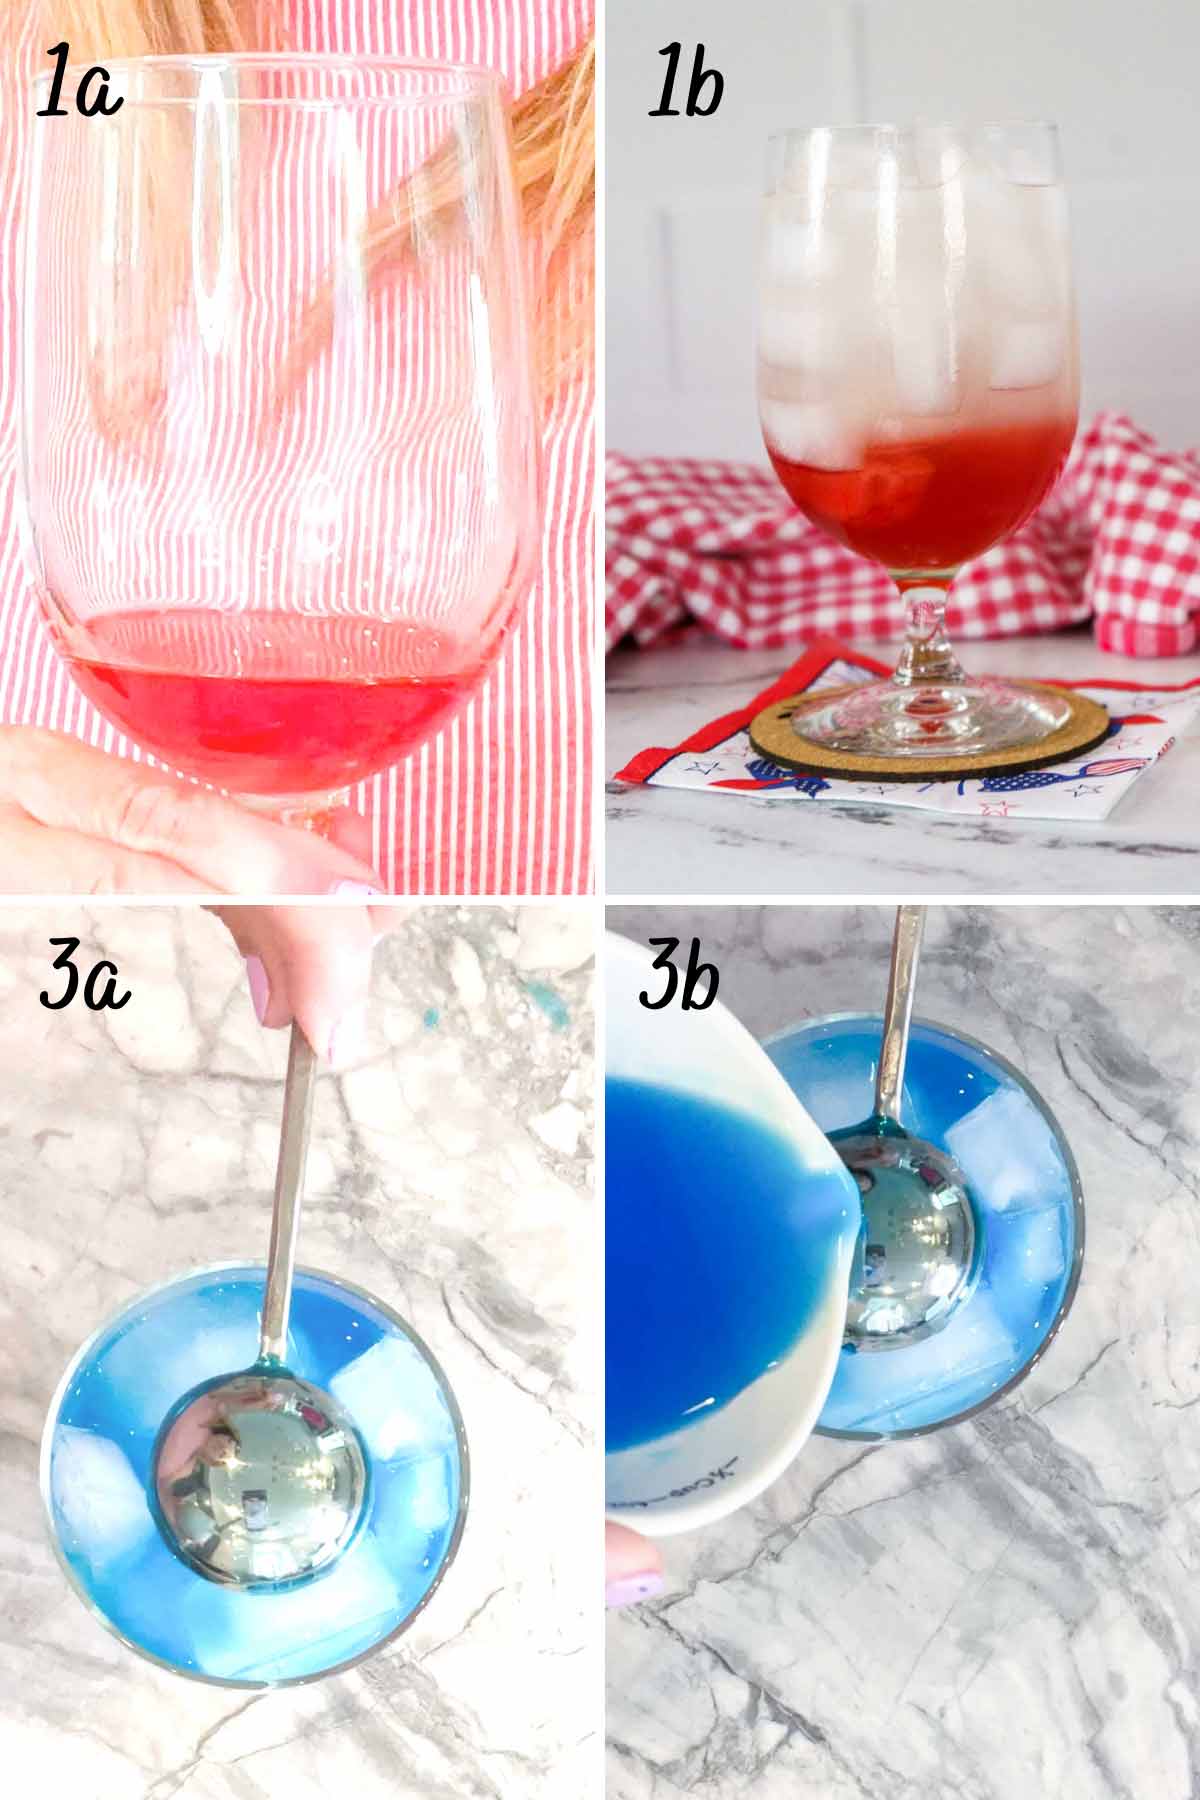 step by step instructions for making a layered drink